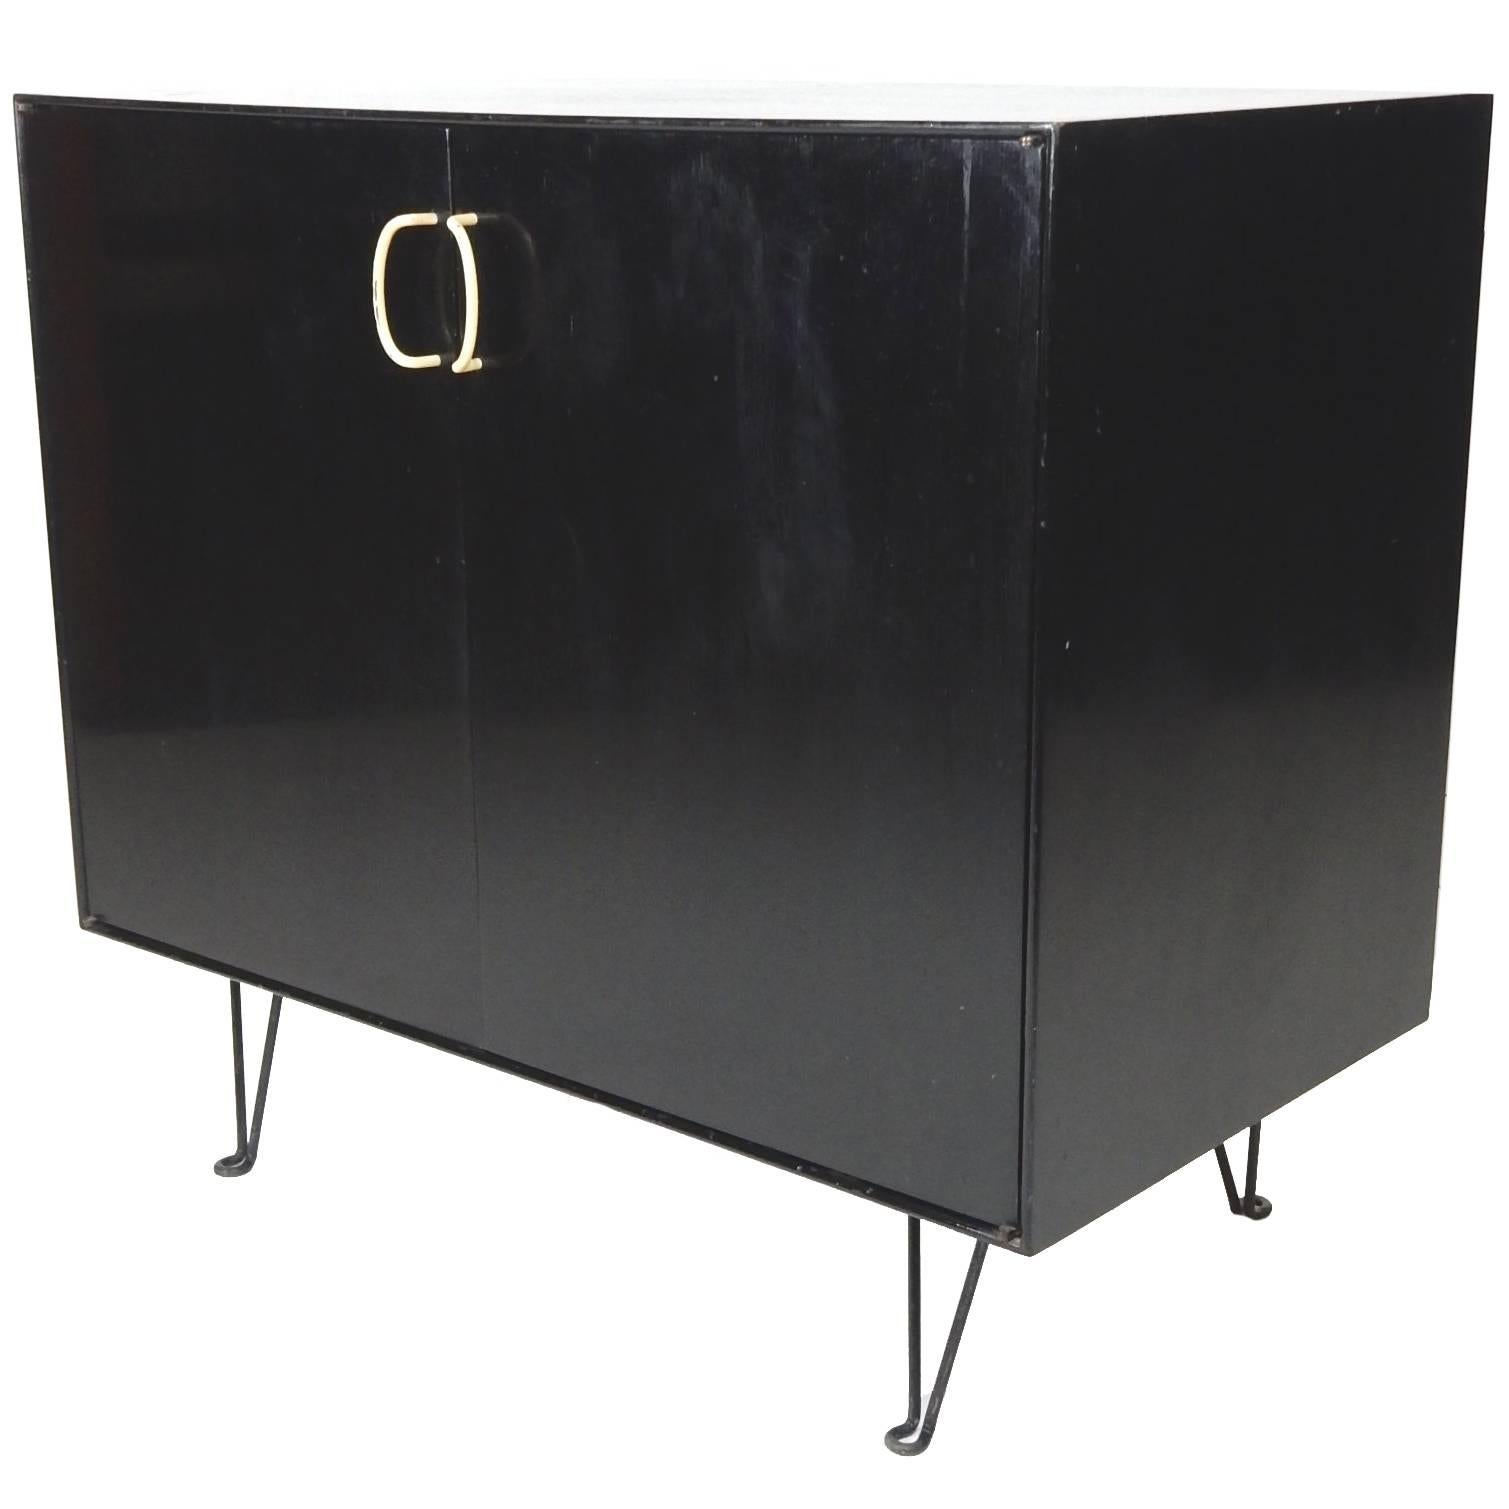 Early George Nelson Thin Line Ebonized Cabinet for Herman Miller